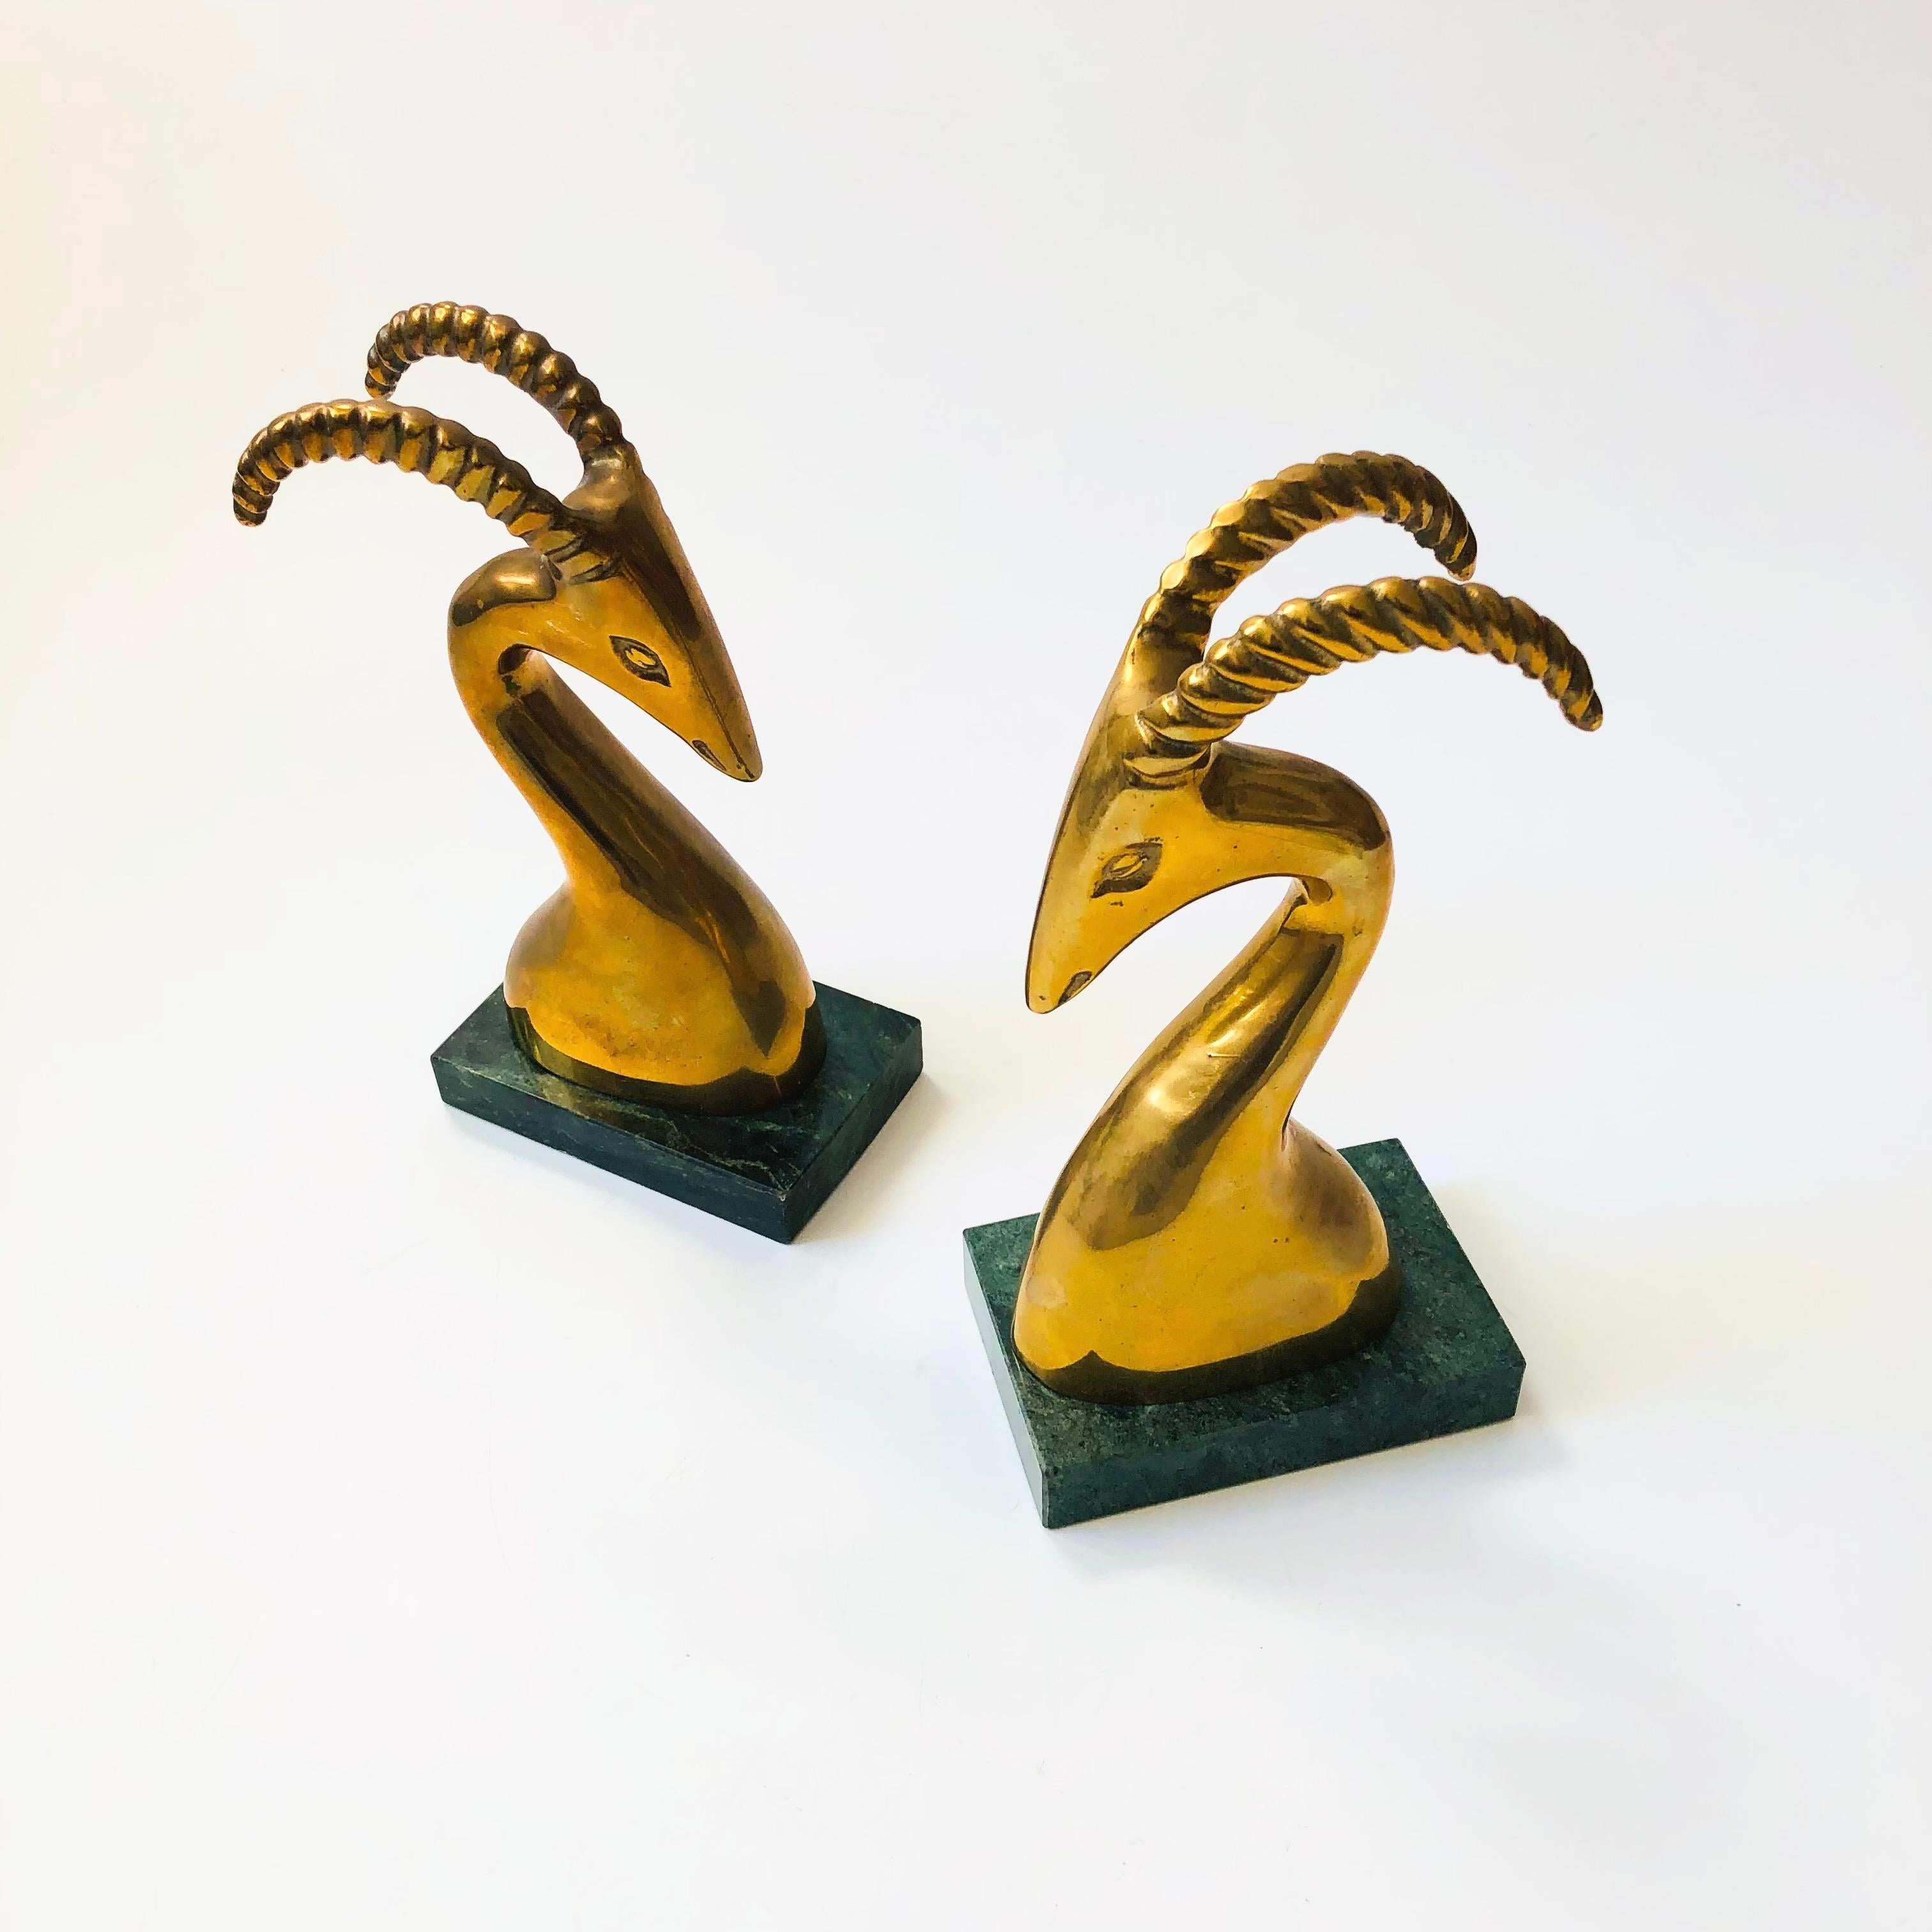 A pair of vintage brass bookends in the shape of gazelles. Beautiful gold patina and green stone bases. Great stylized deco design.

